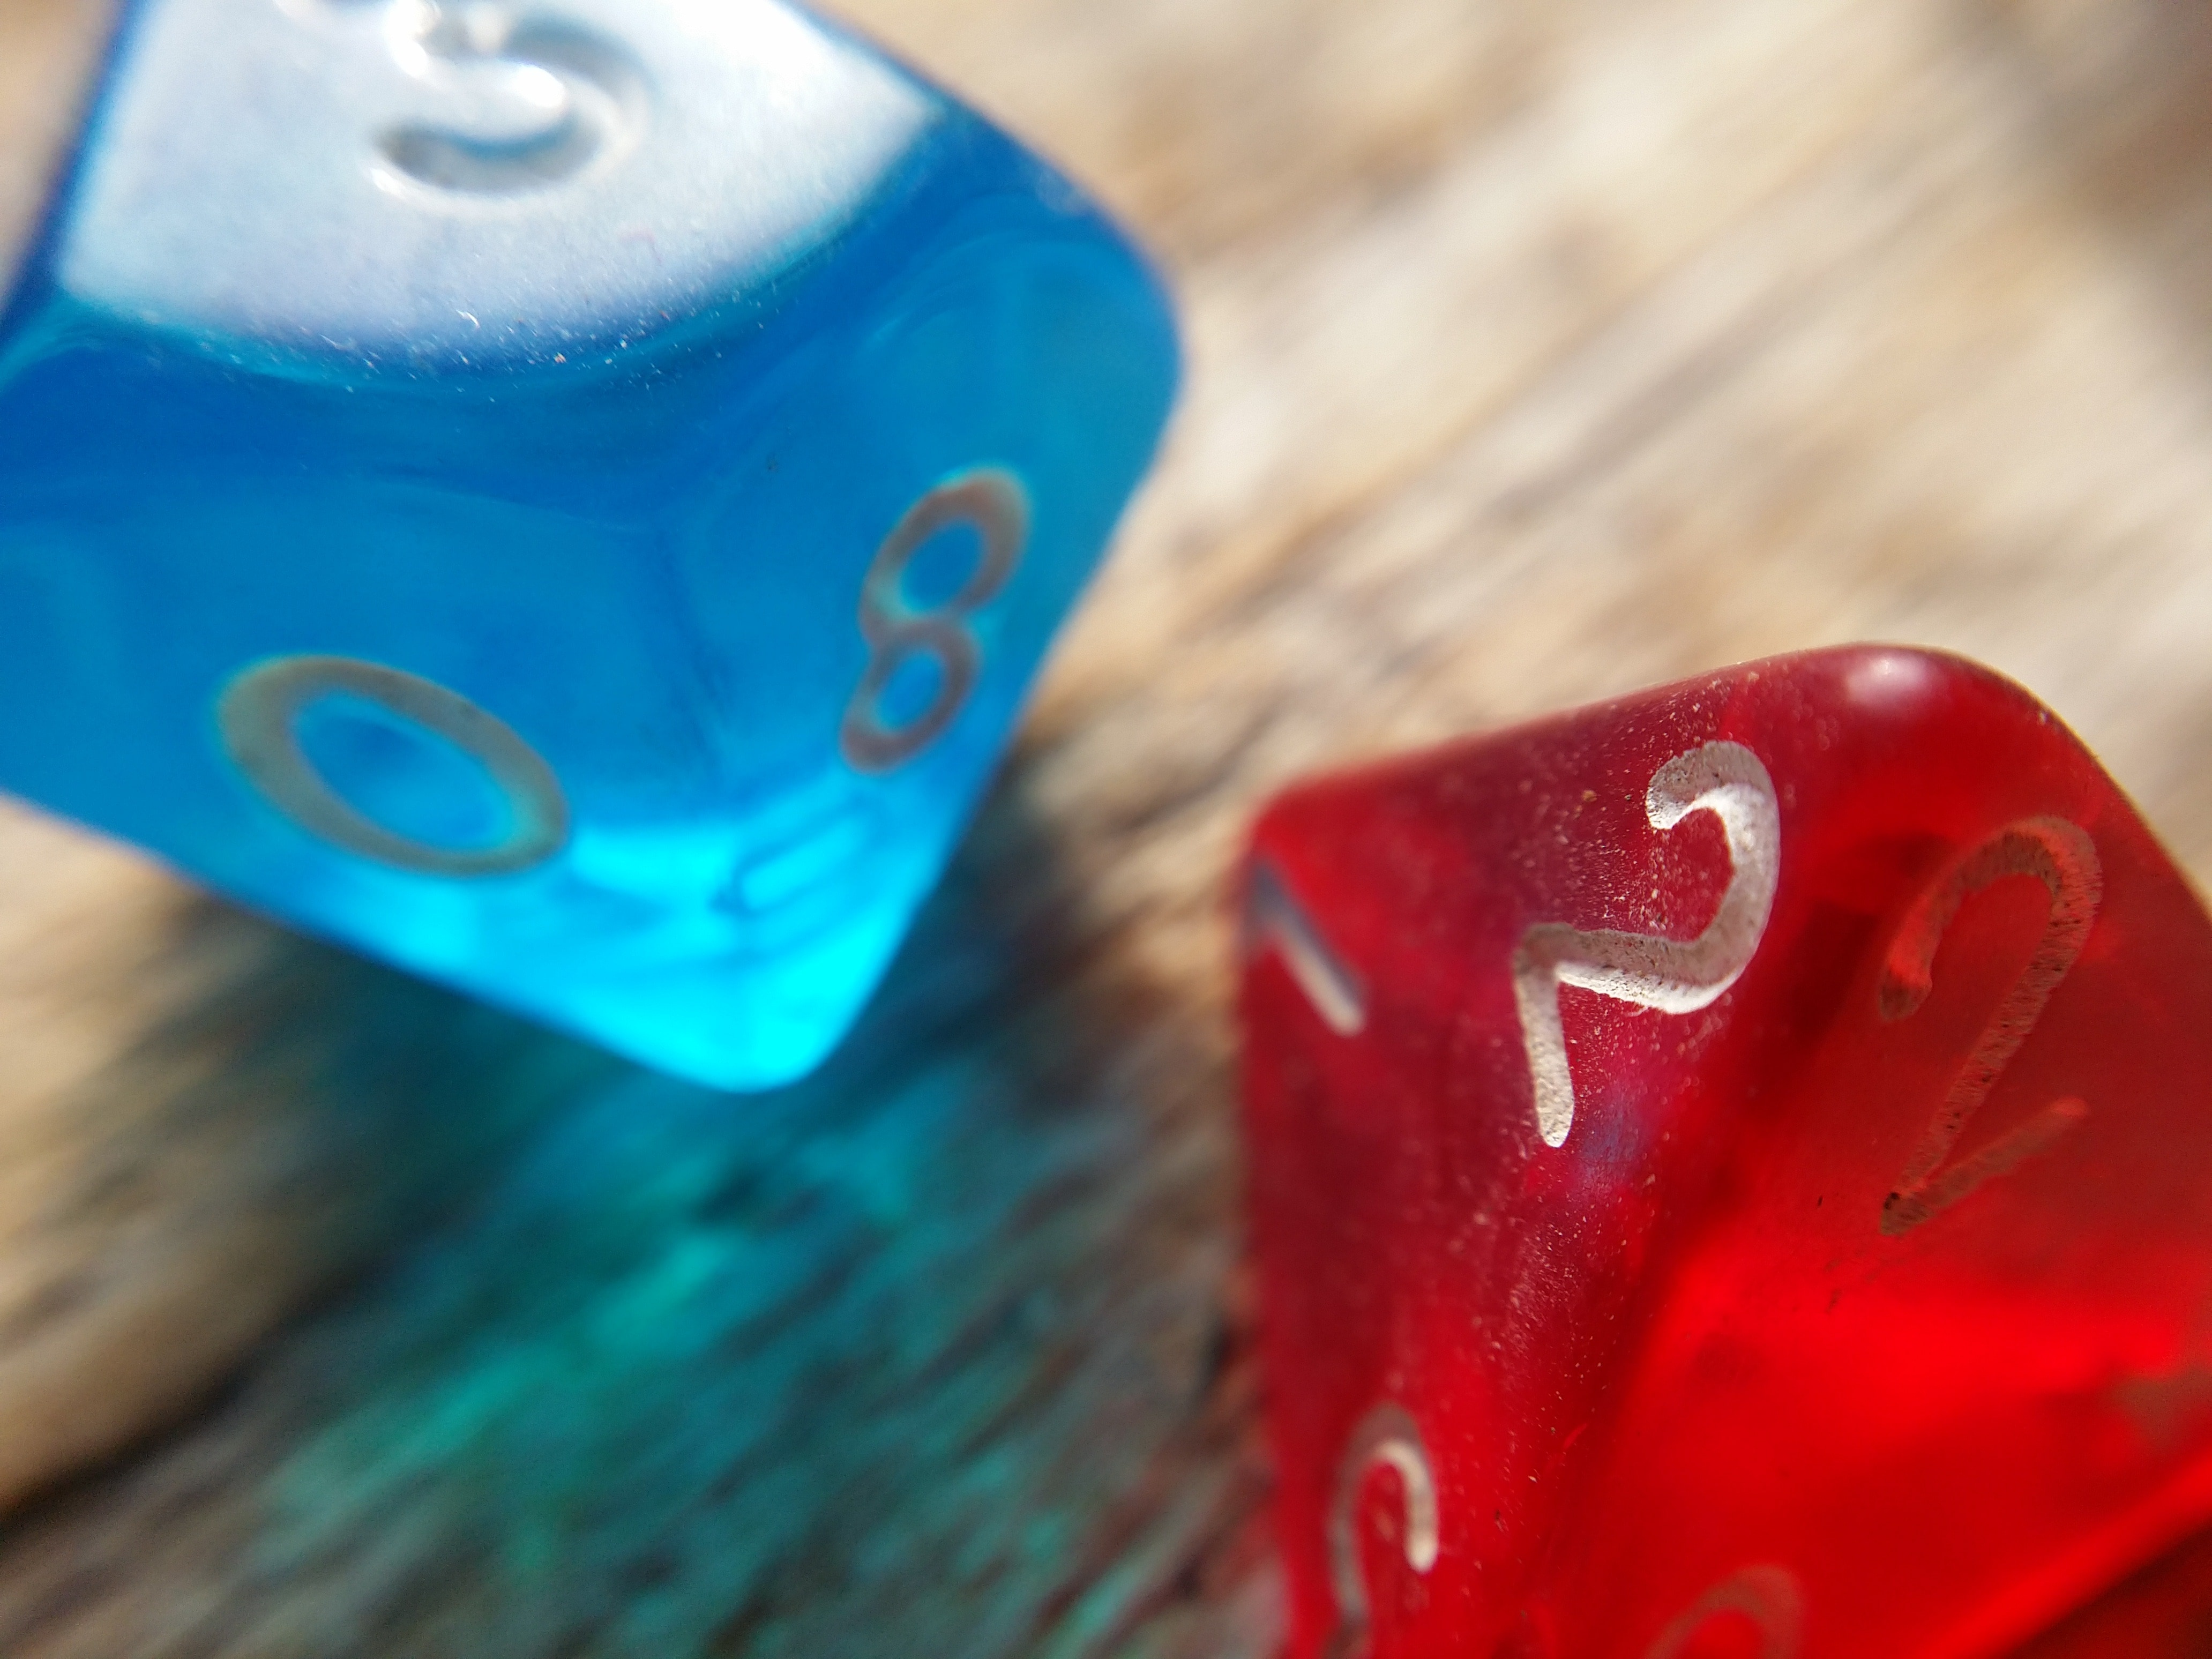 blue dice and red dice